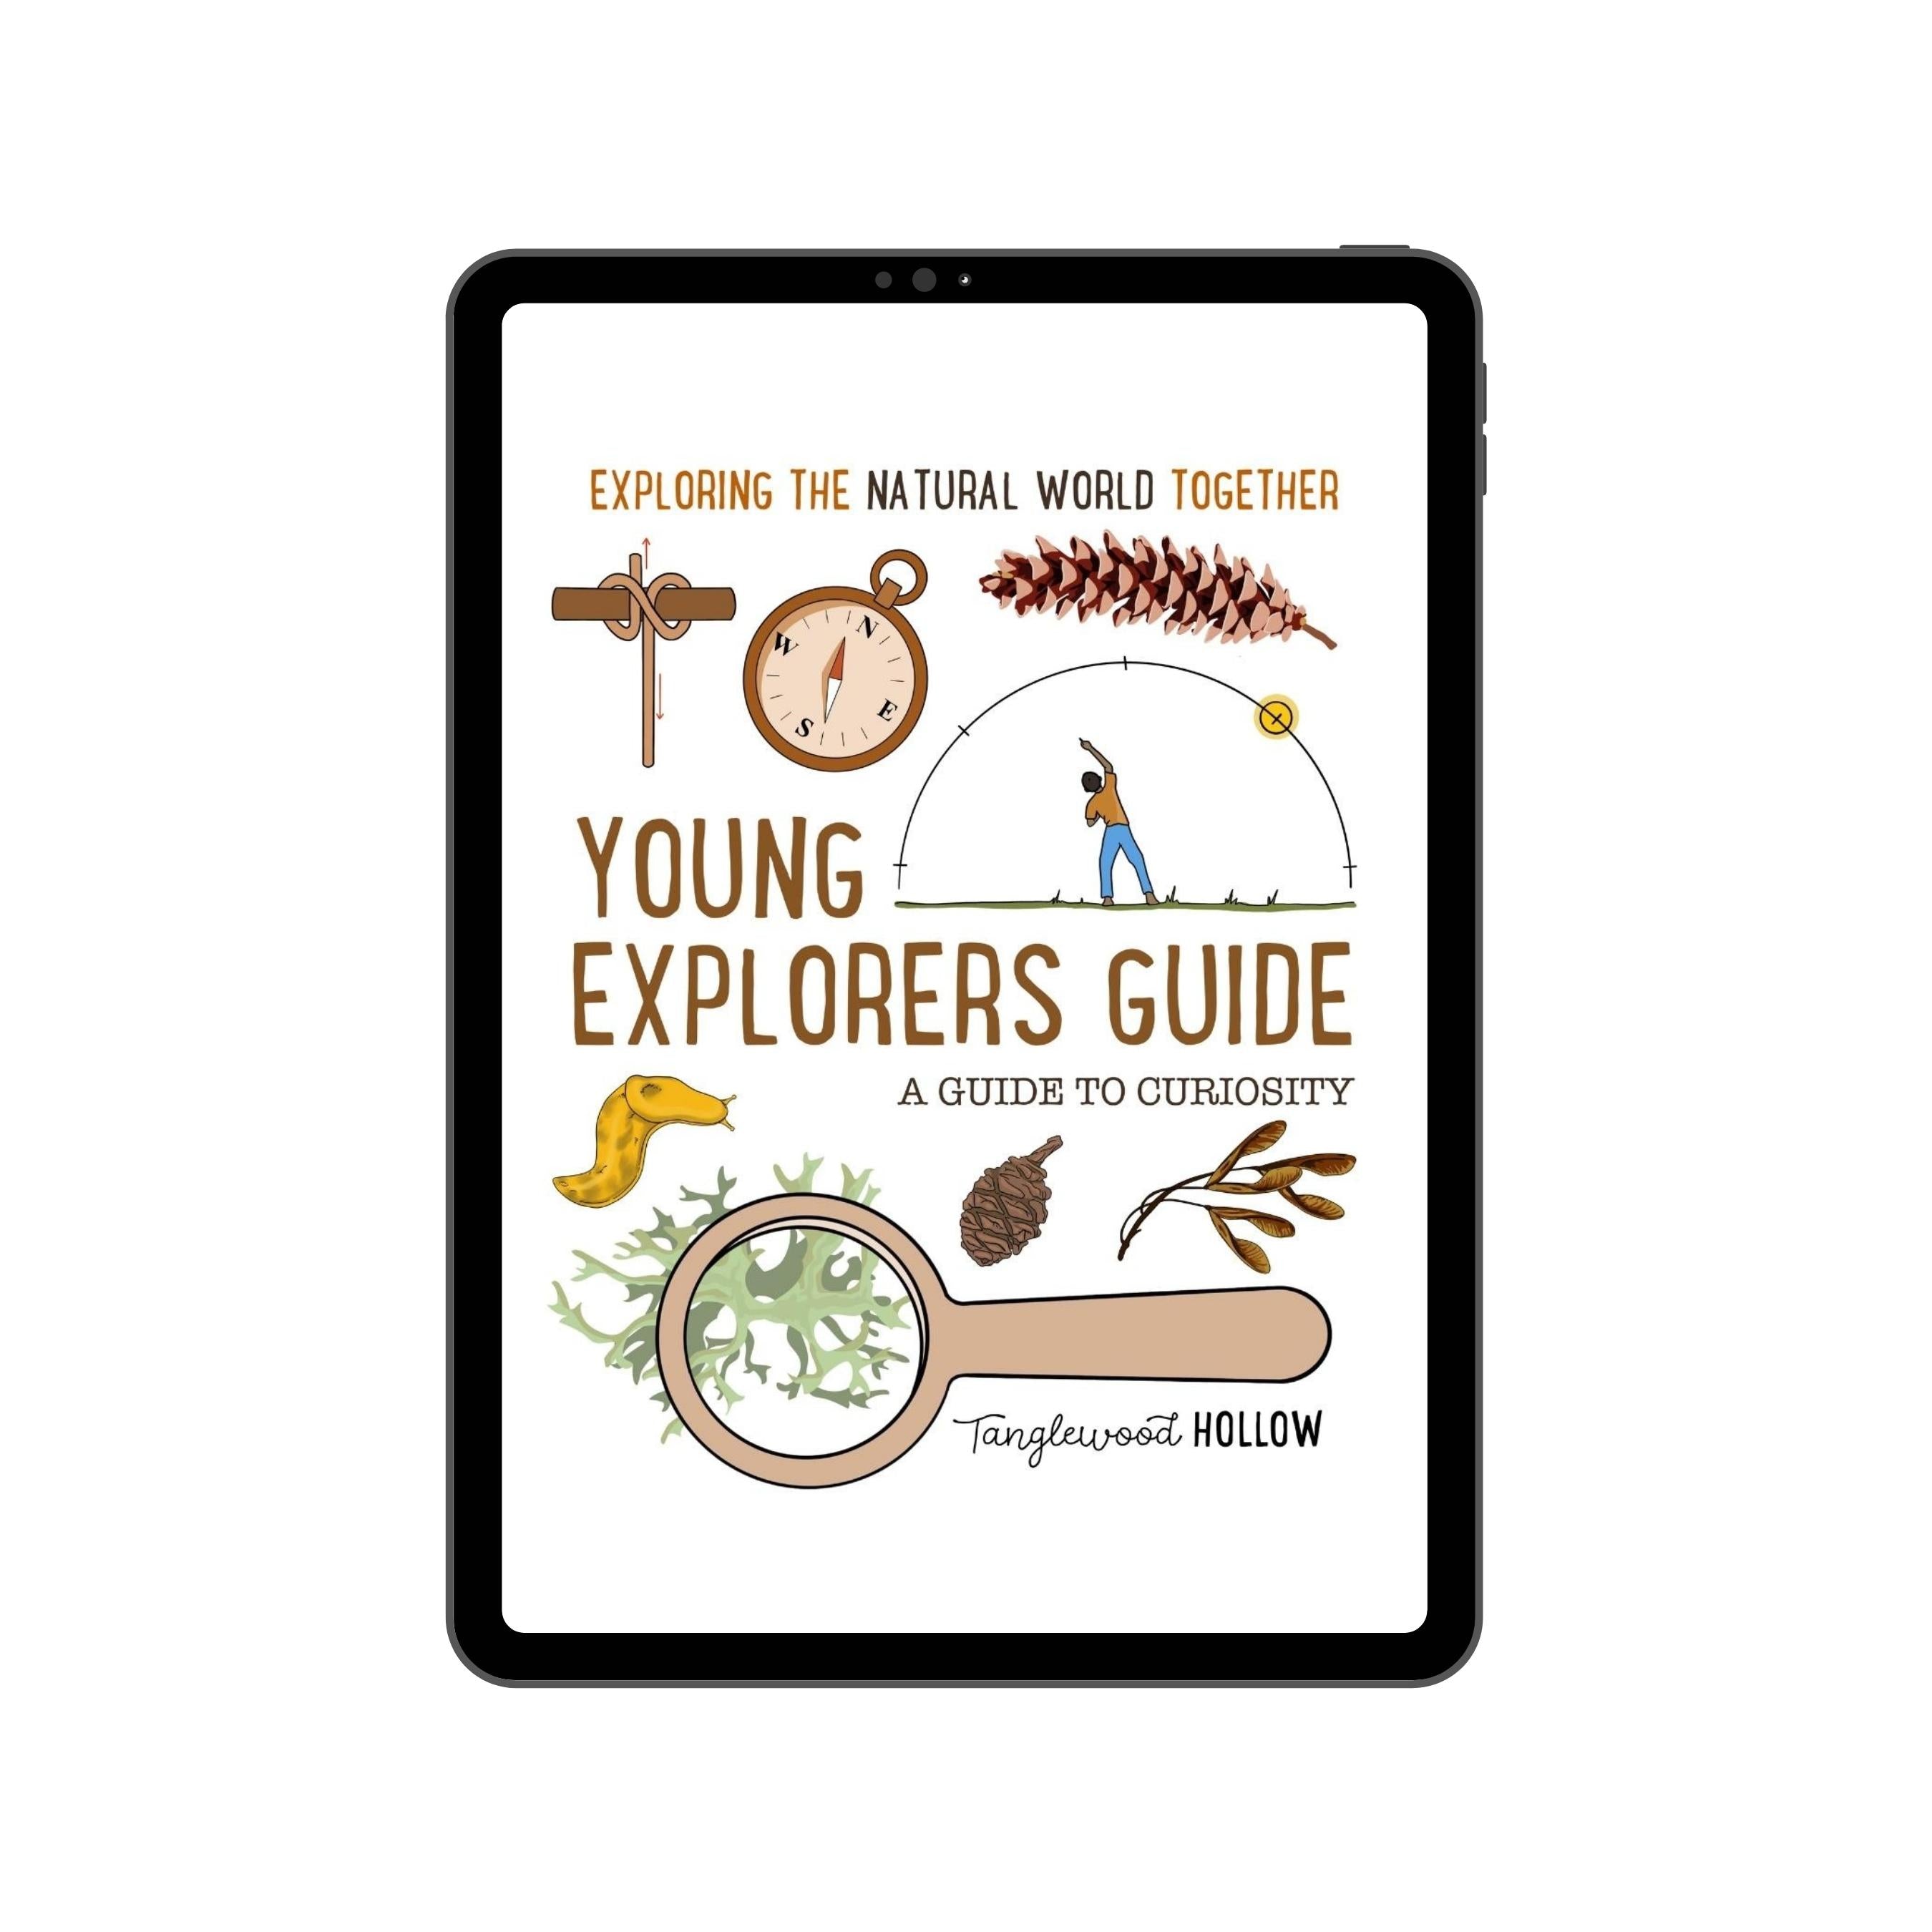 Young Explorers Guide: A Digital Guide to Curiosity